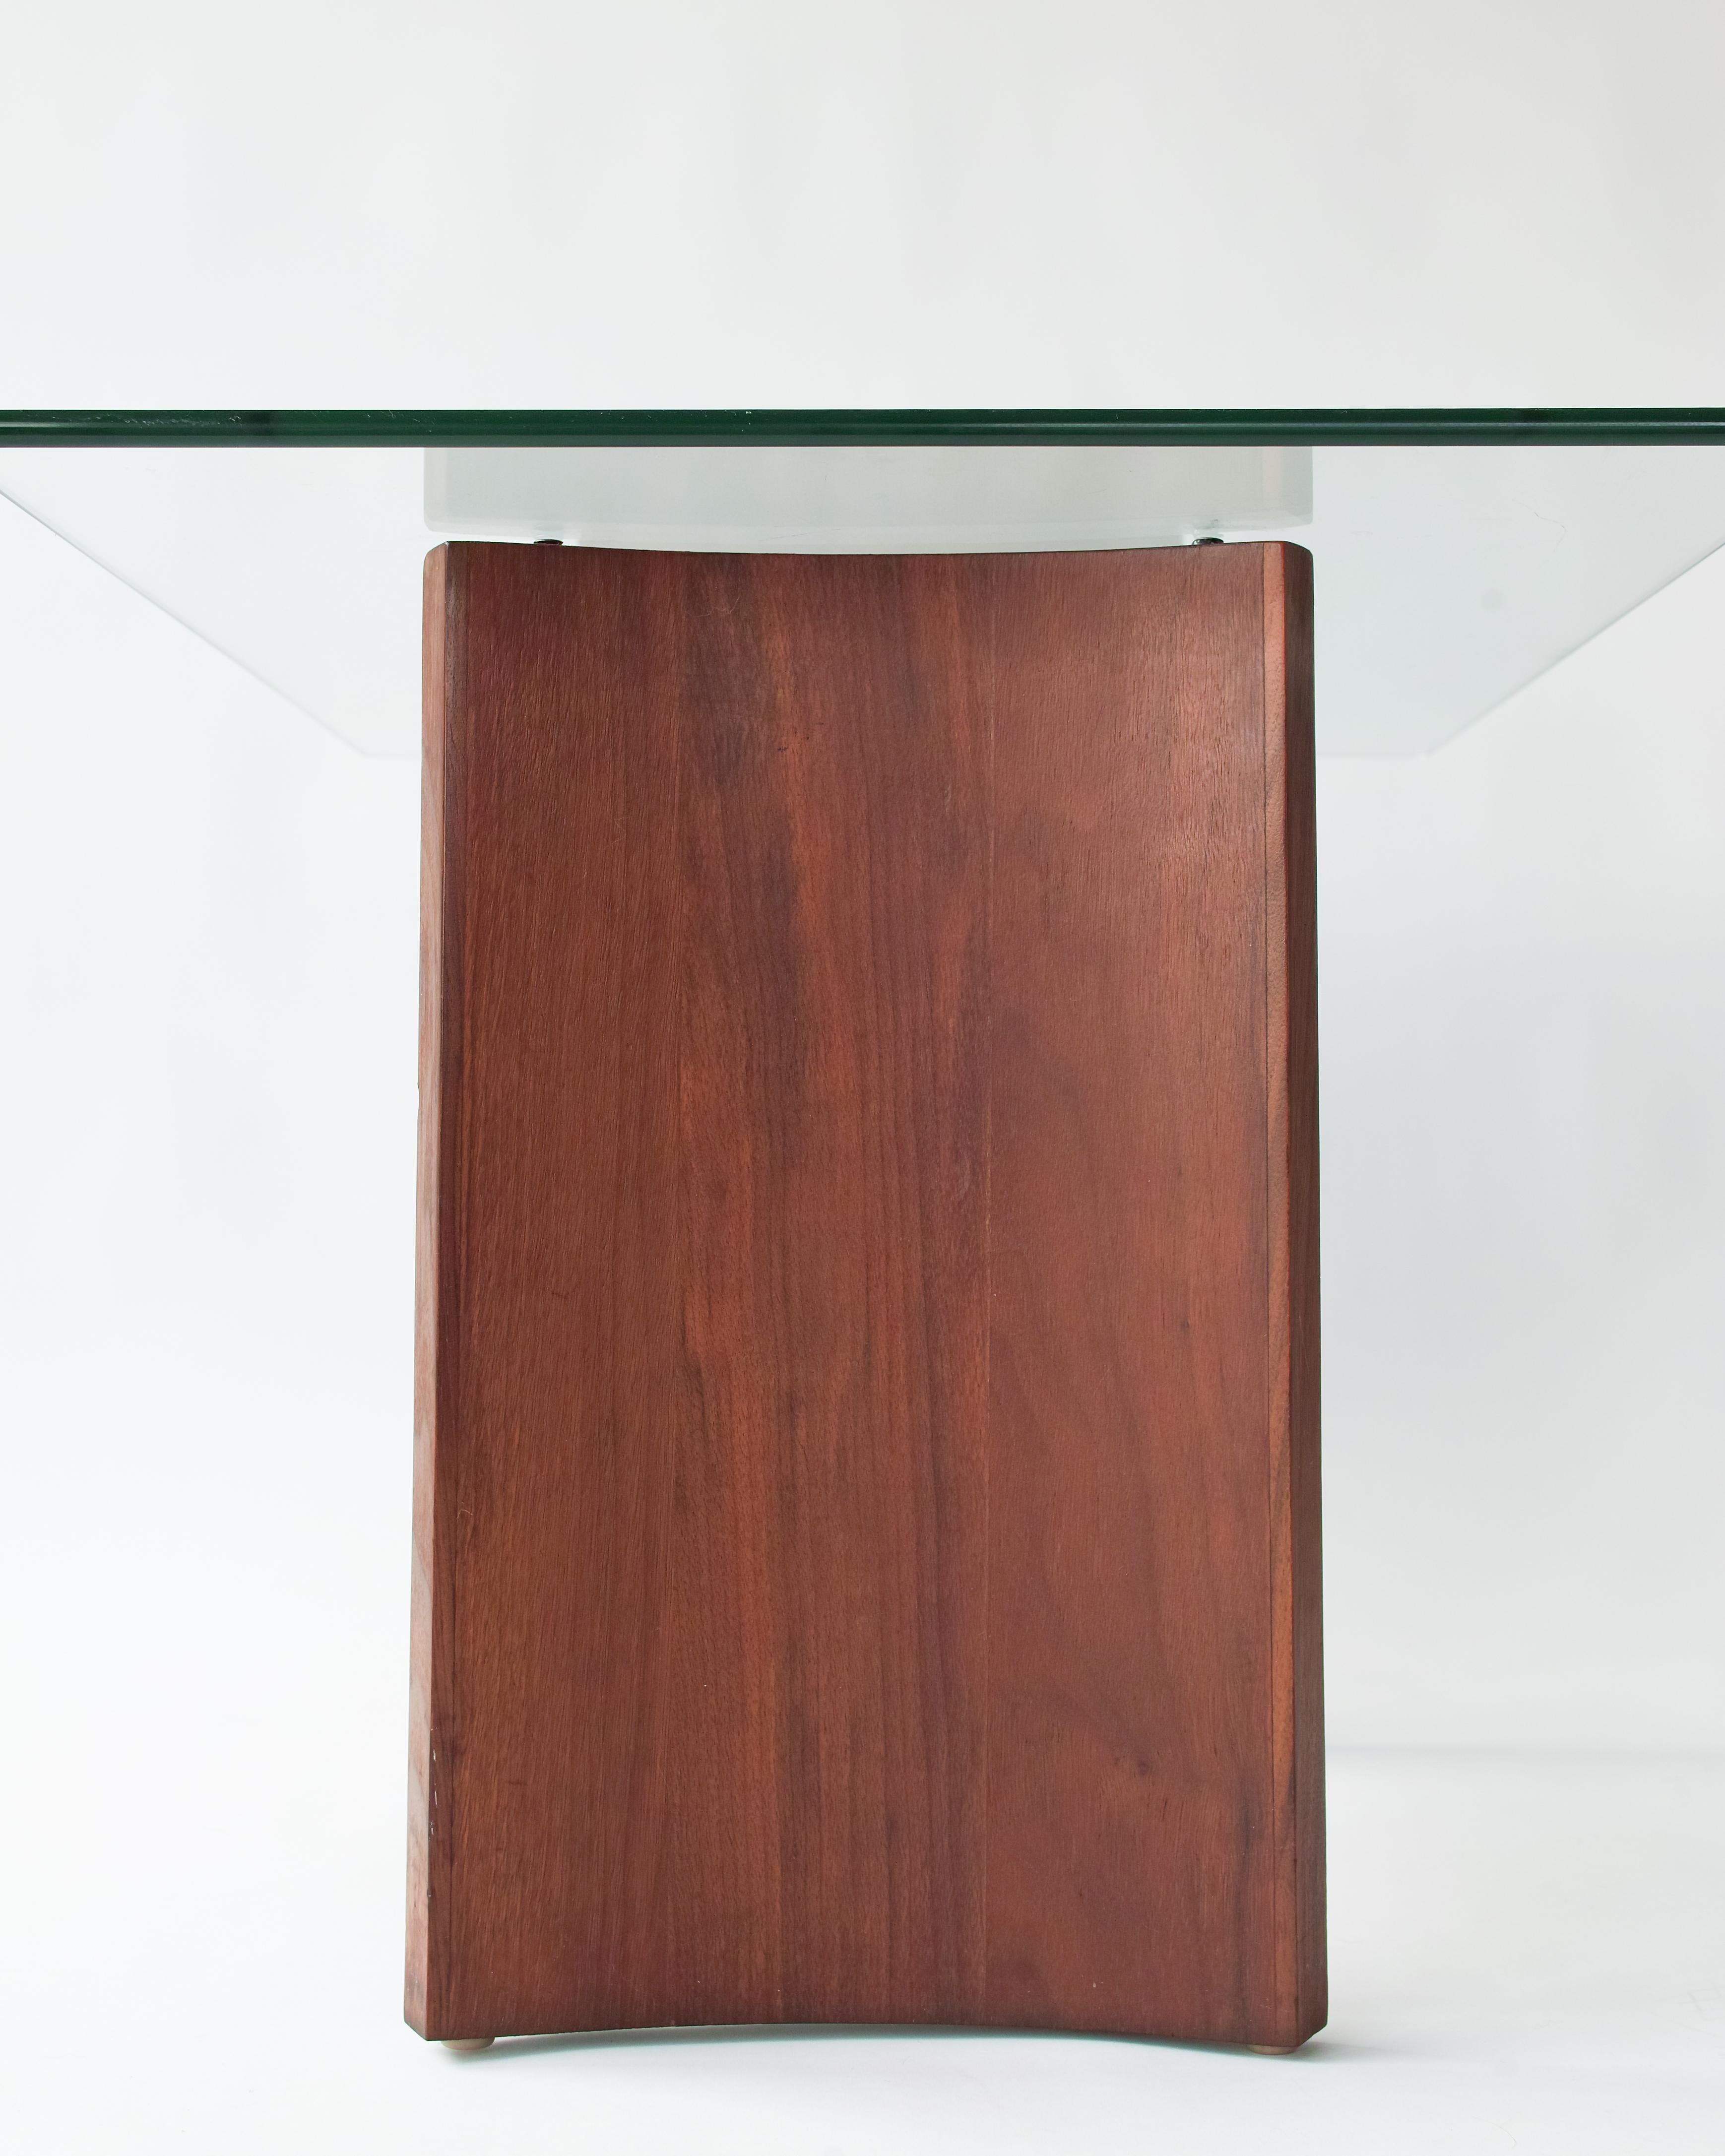 Vladimir Kagan Walnut and Glass End Tables In Good Condition For Sale In Brooklyn, NY